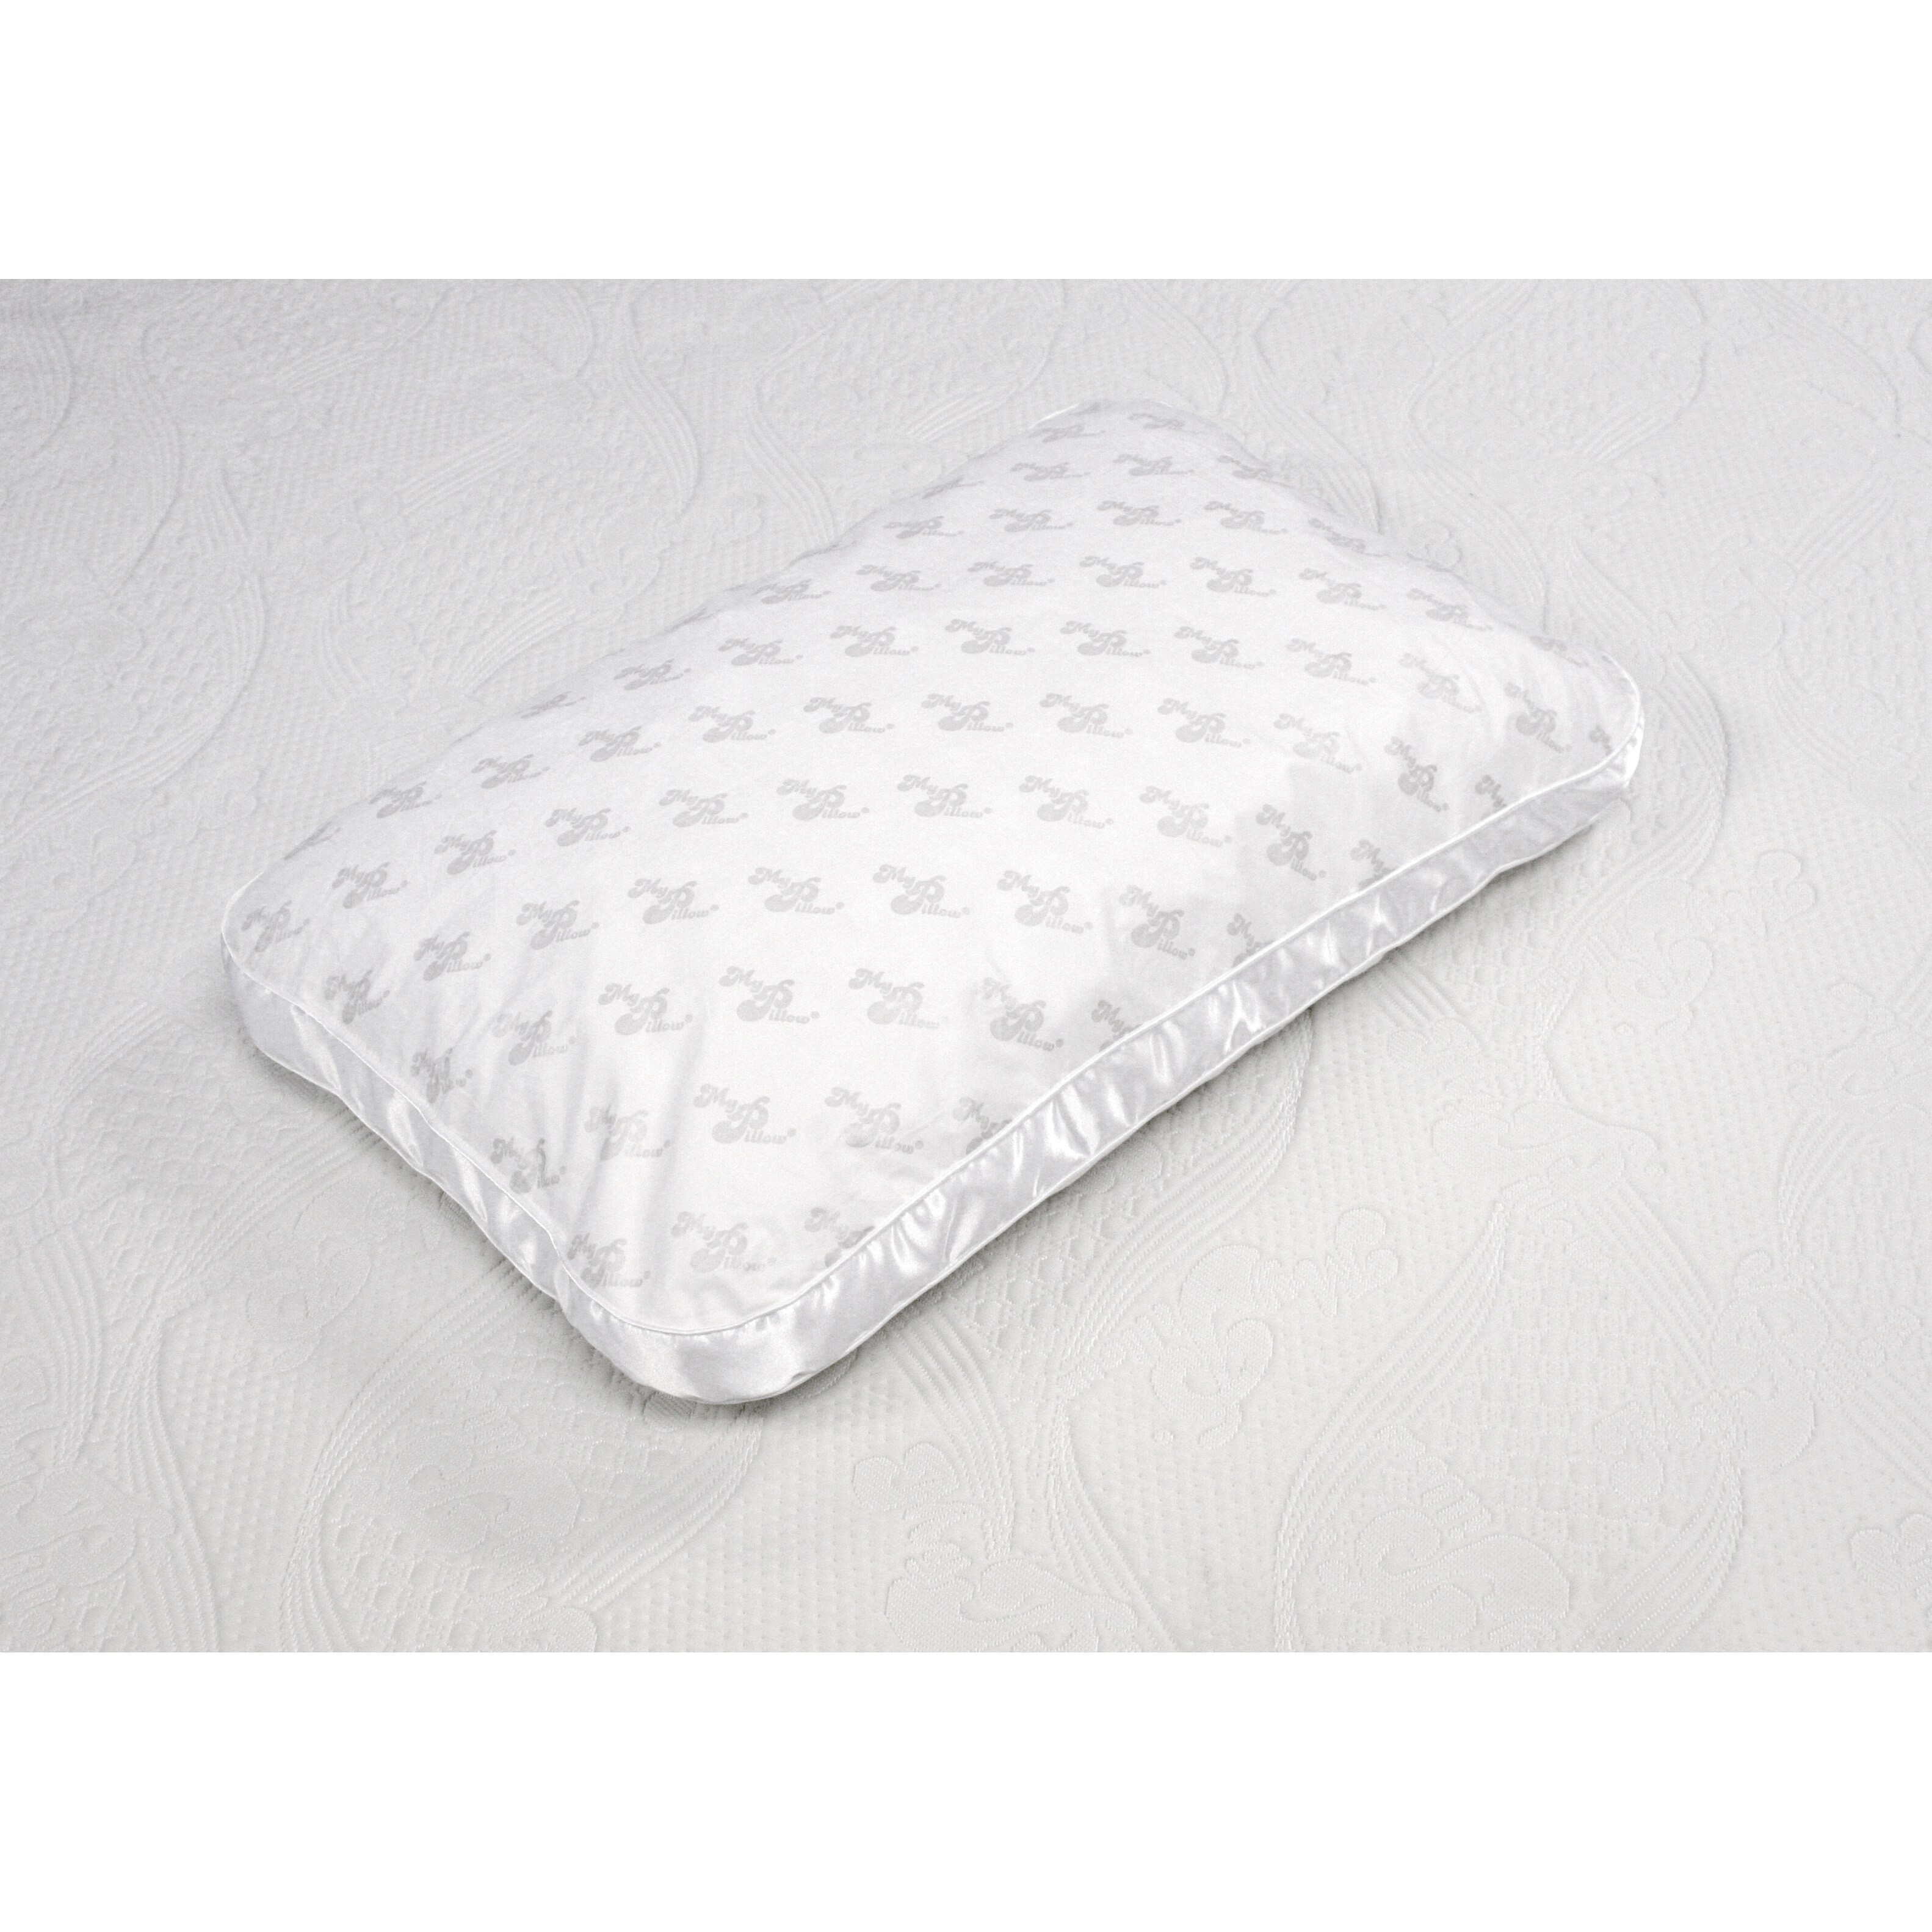 my pillow overstock sale